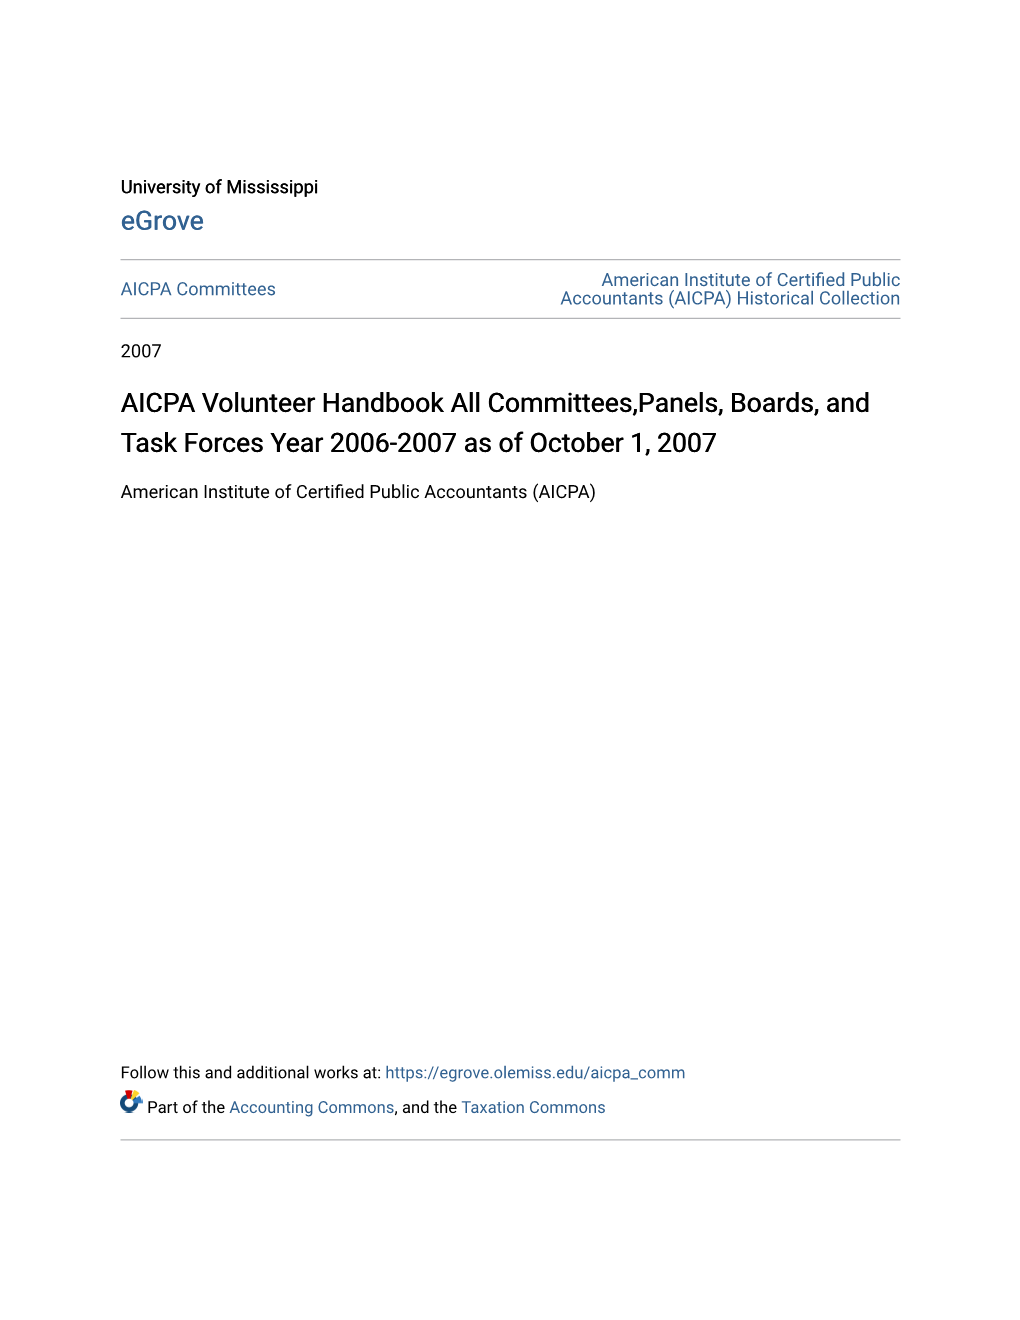 AICPA Volunteer Handbook All Committees,Panels, Boards, and Task Forces Year 2006-2007 As of October 1, 2007